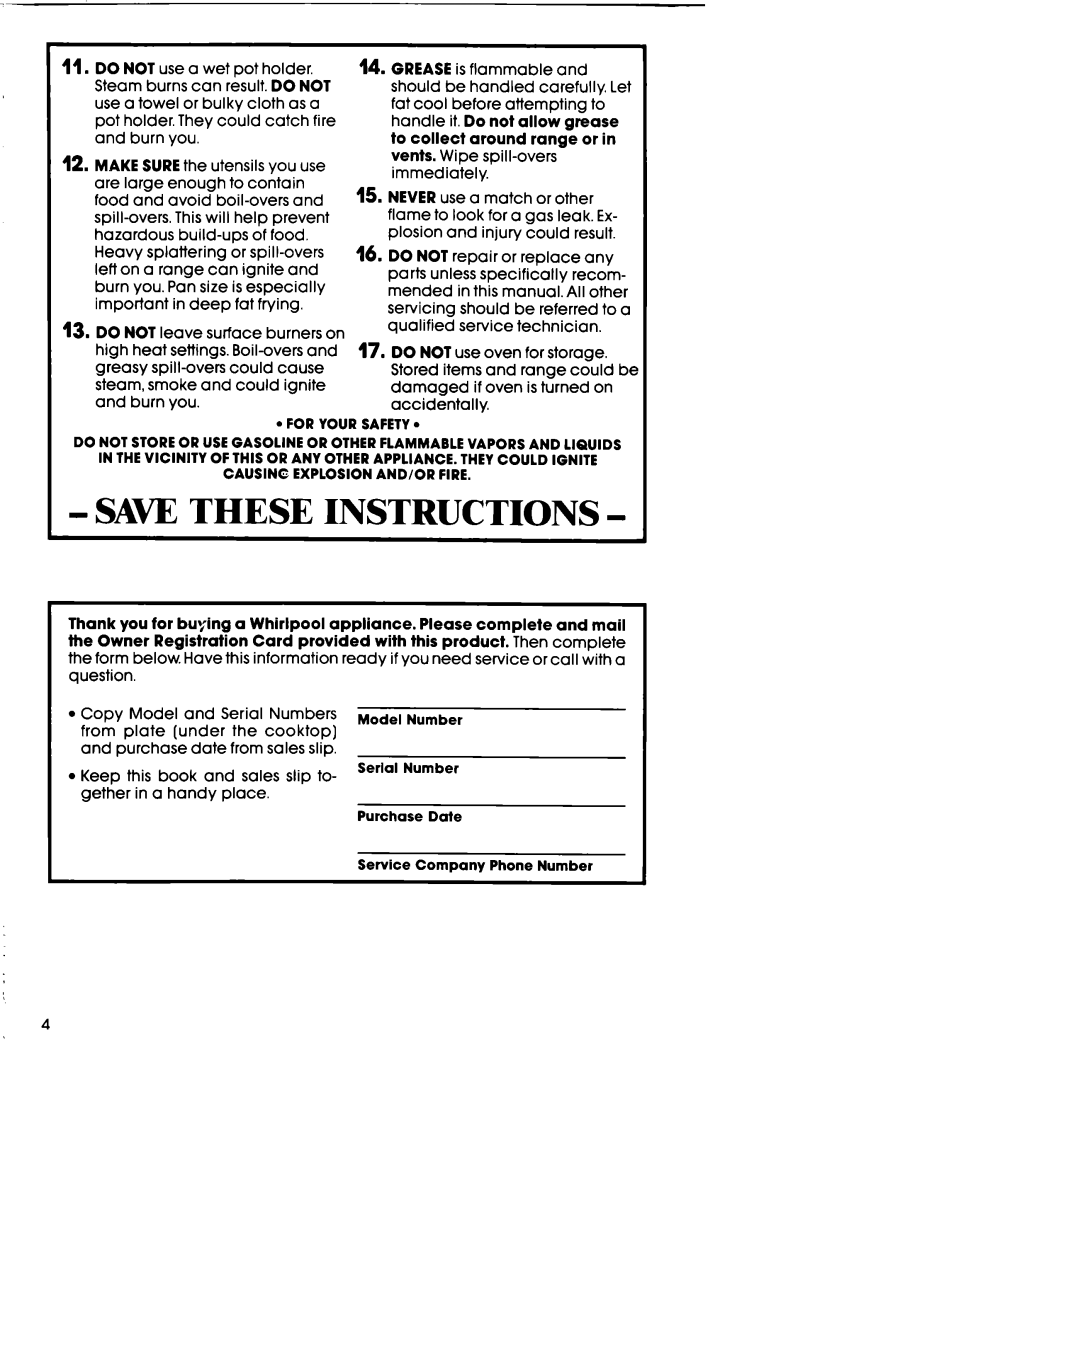 Whirlpool SF395PEP manual Saw These Instructions 